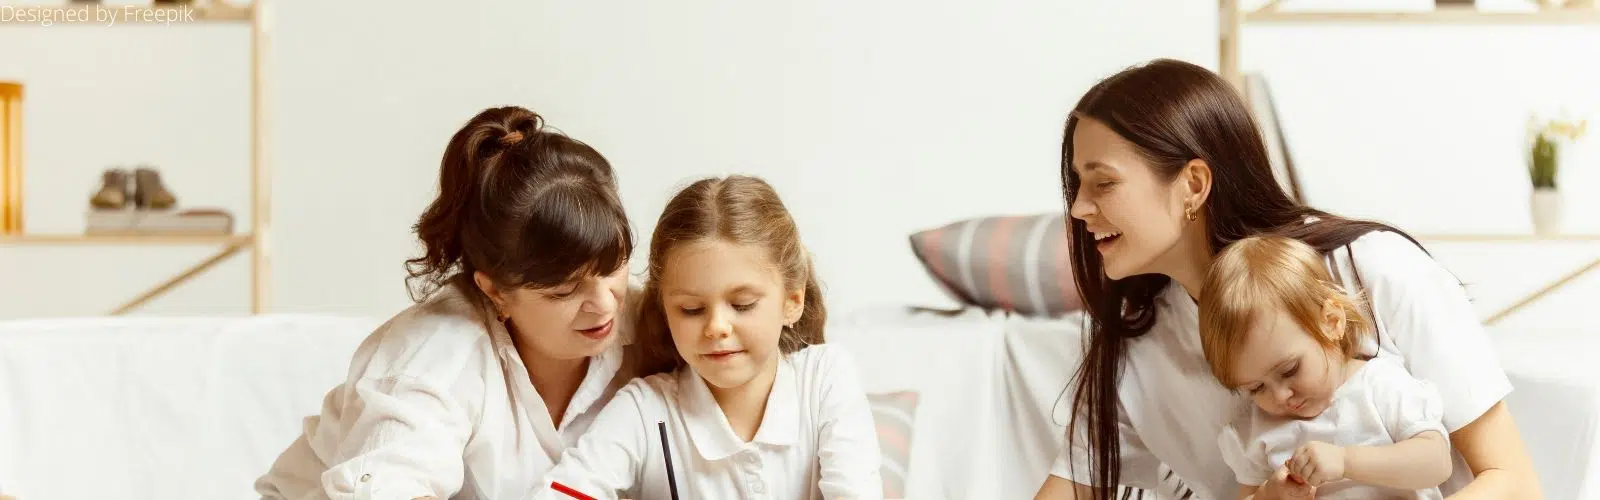 In-home childcare: tips on how to properly supervise your in-home nanny